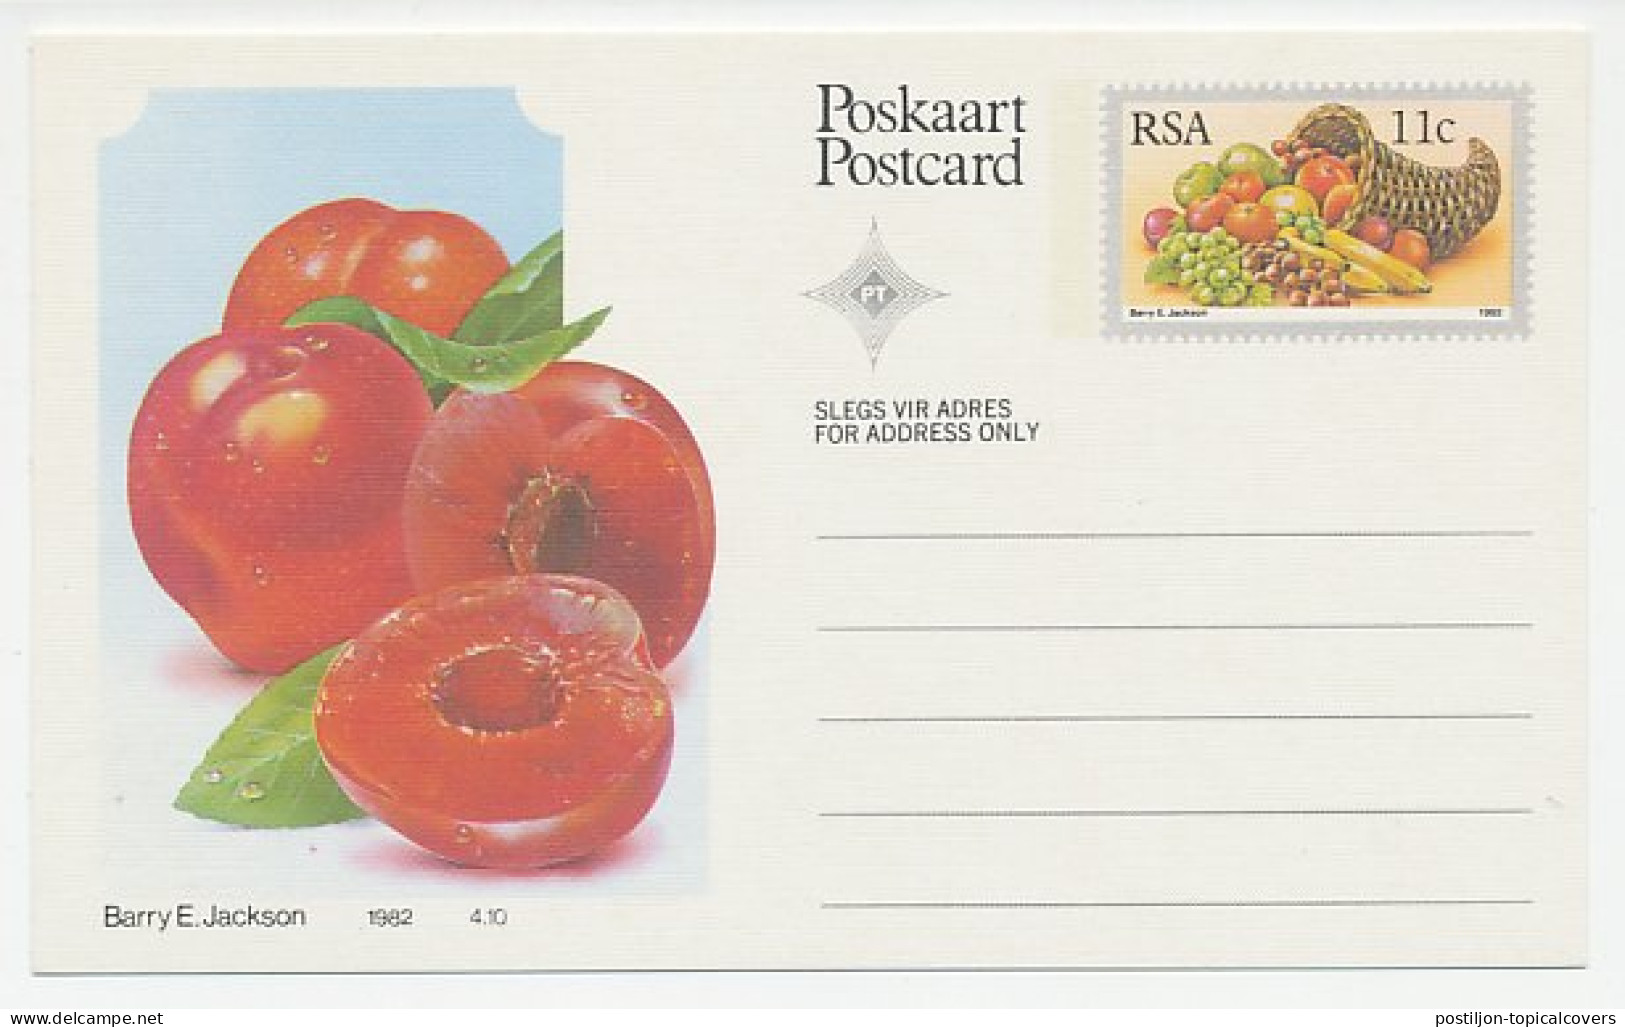 Postal Stationery Republic Of South Africa 1982 Plum - Fruits